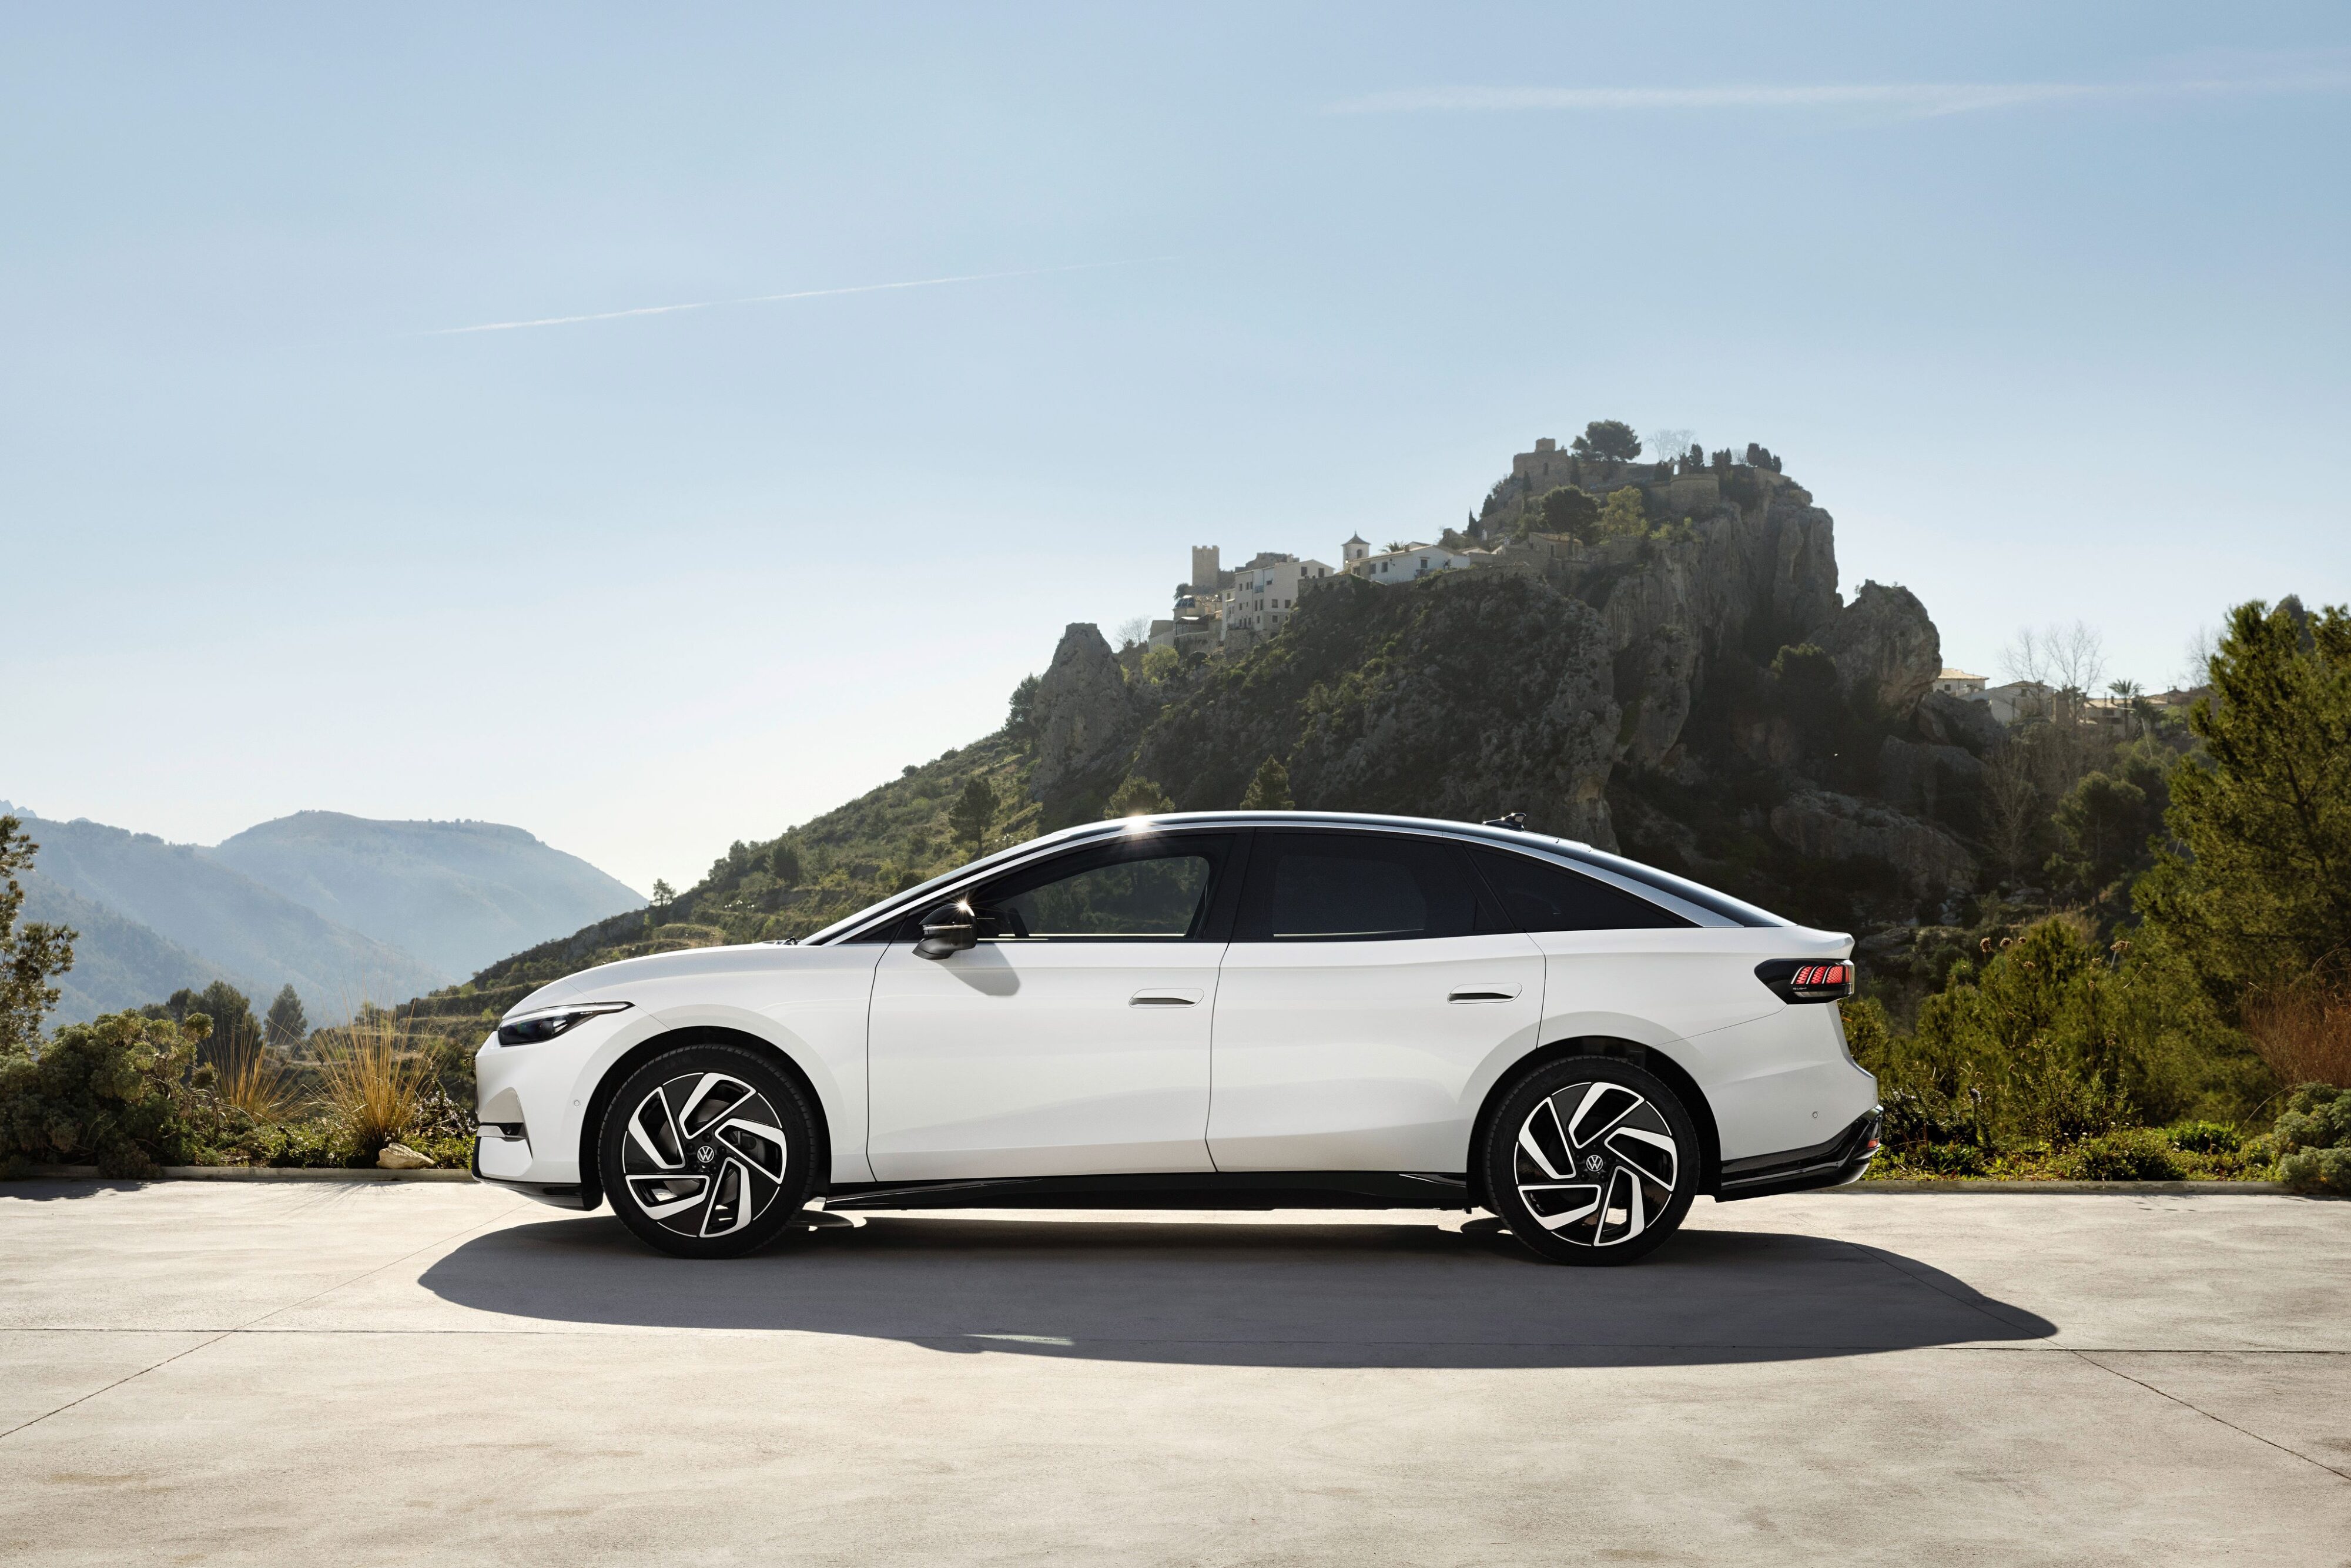 Side view of Volkswagen's new ID.7 electric limousine in a white and black colourway.